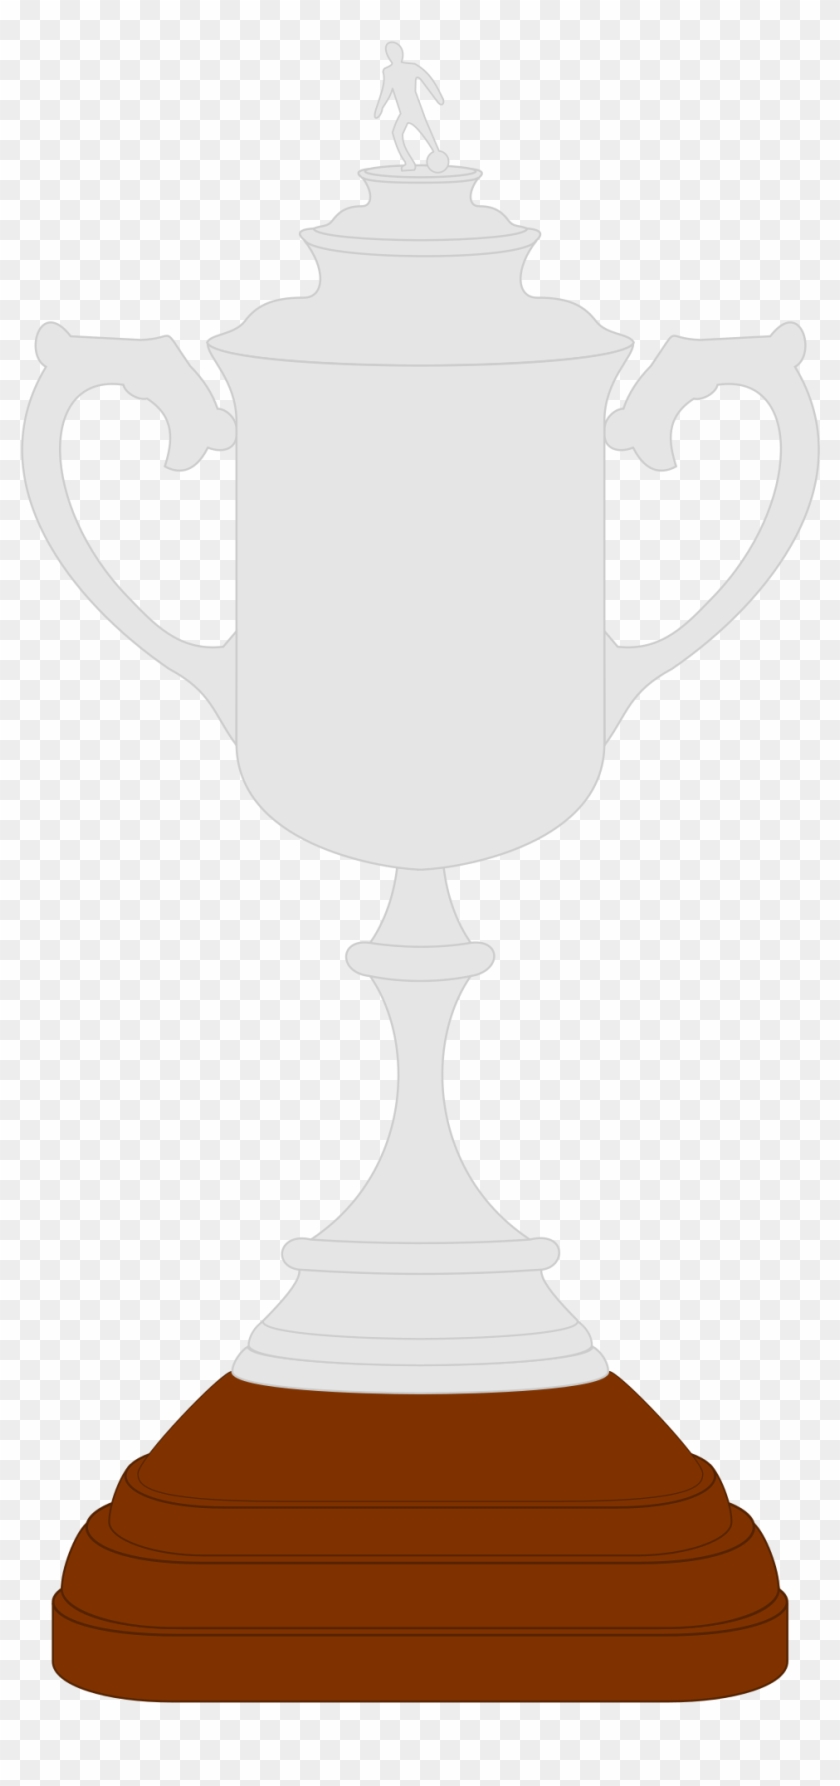 File - Scottish Cup - Svg - Scottish Cup Png #431126